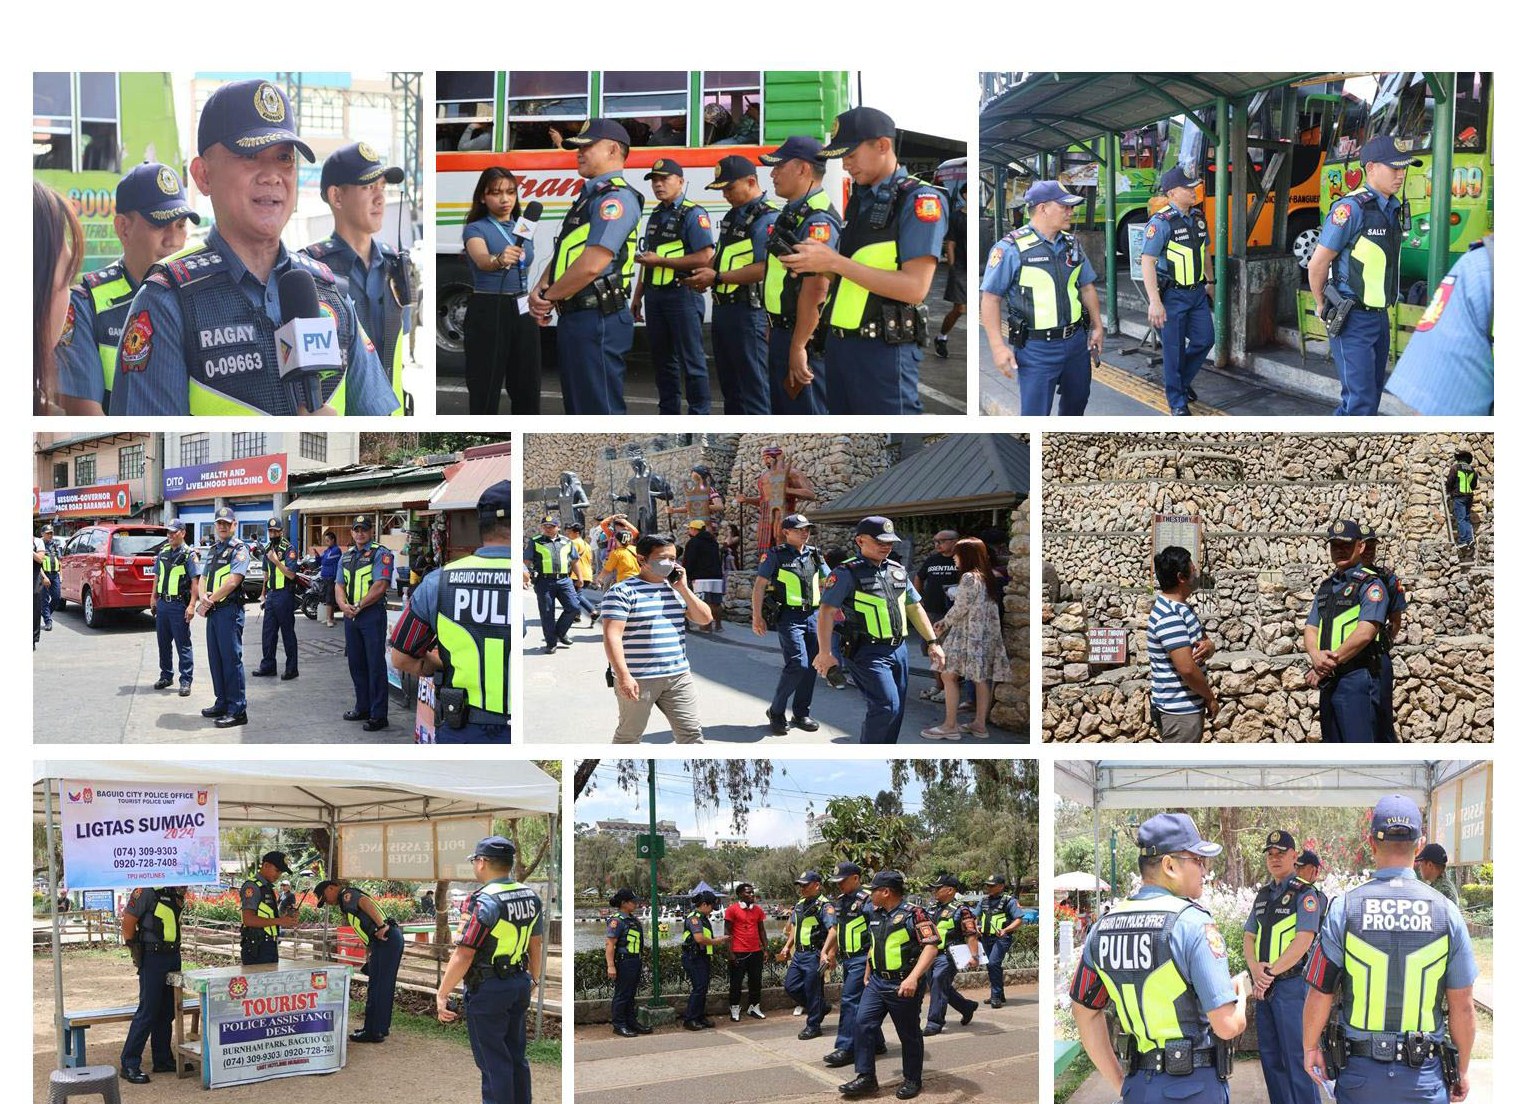 PRO Cor conducted an ocular inspection in tourist destinations and terminals